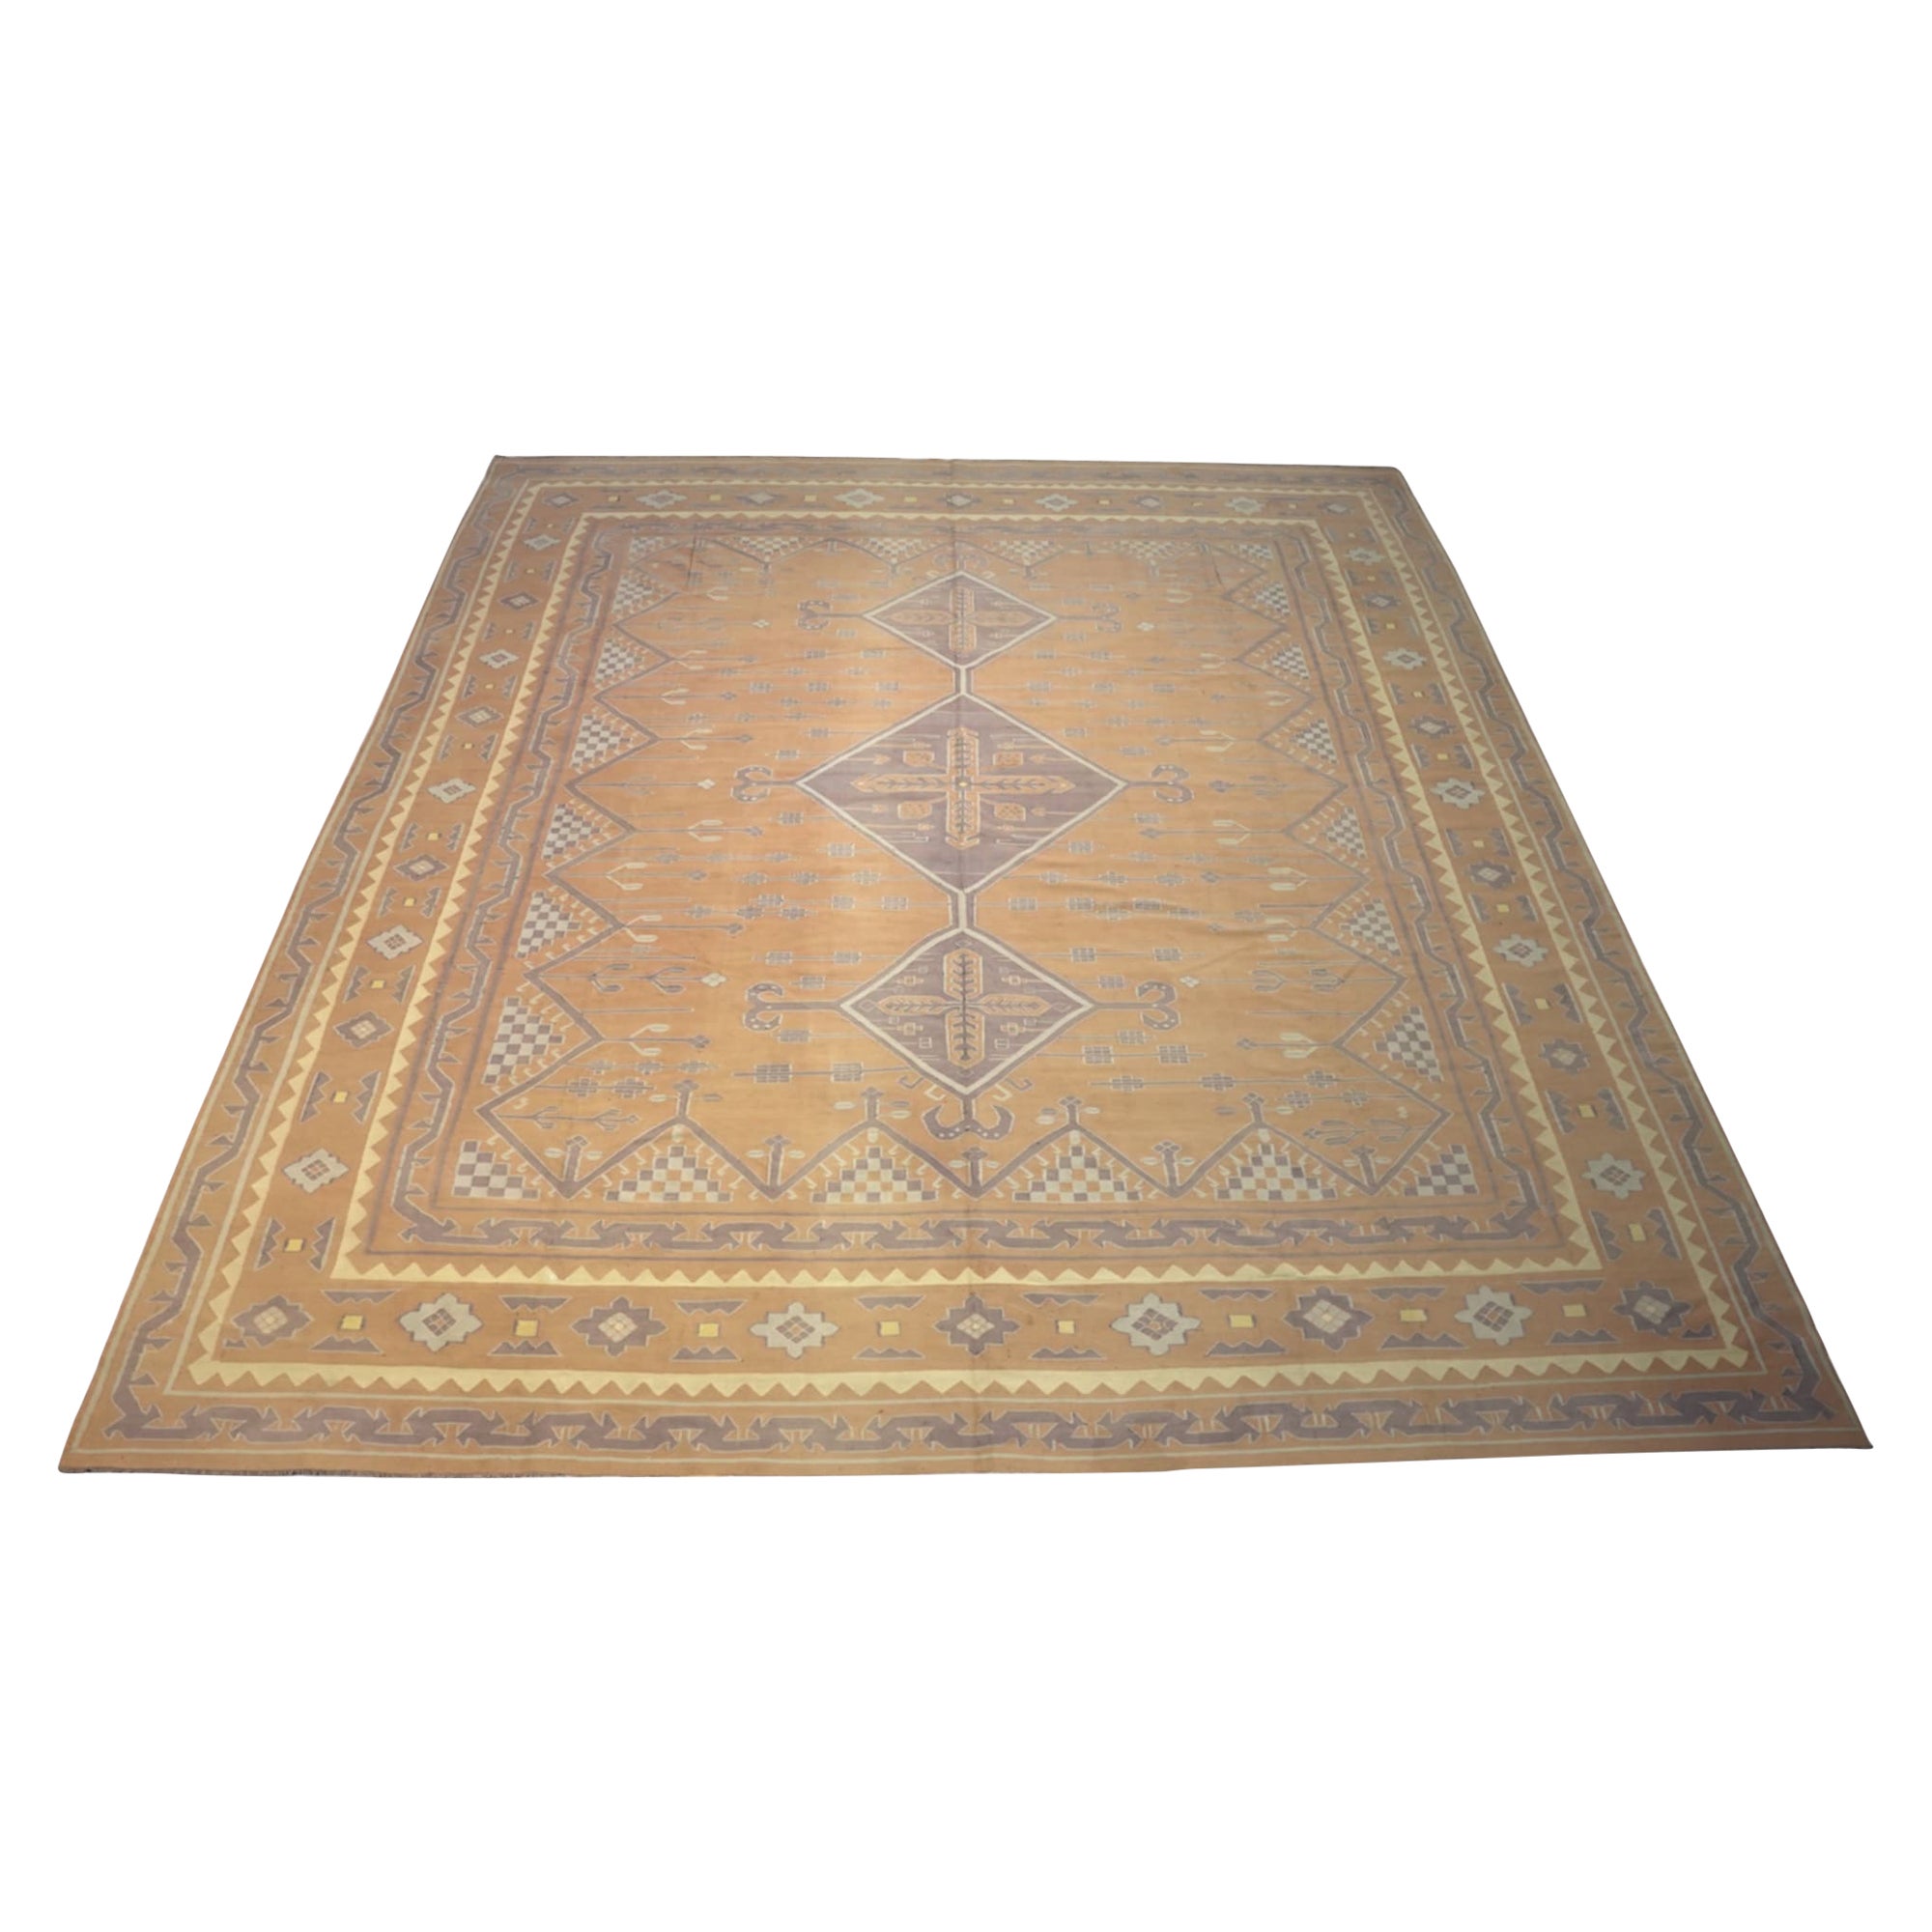 Vintage Dhurrie Rug in Brown with Mauve Geometric Patterns, from Rug & Kilim